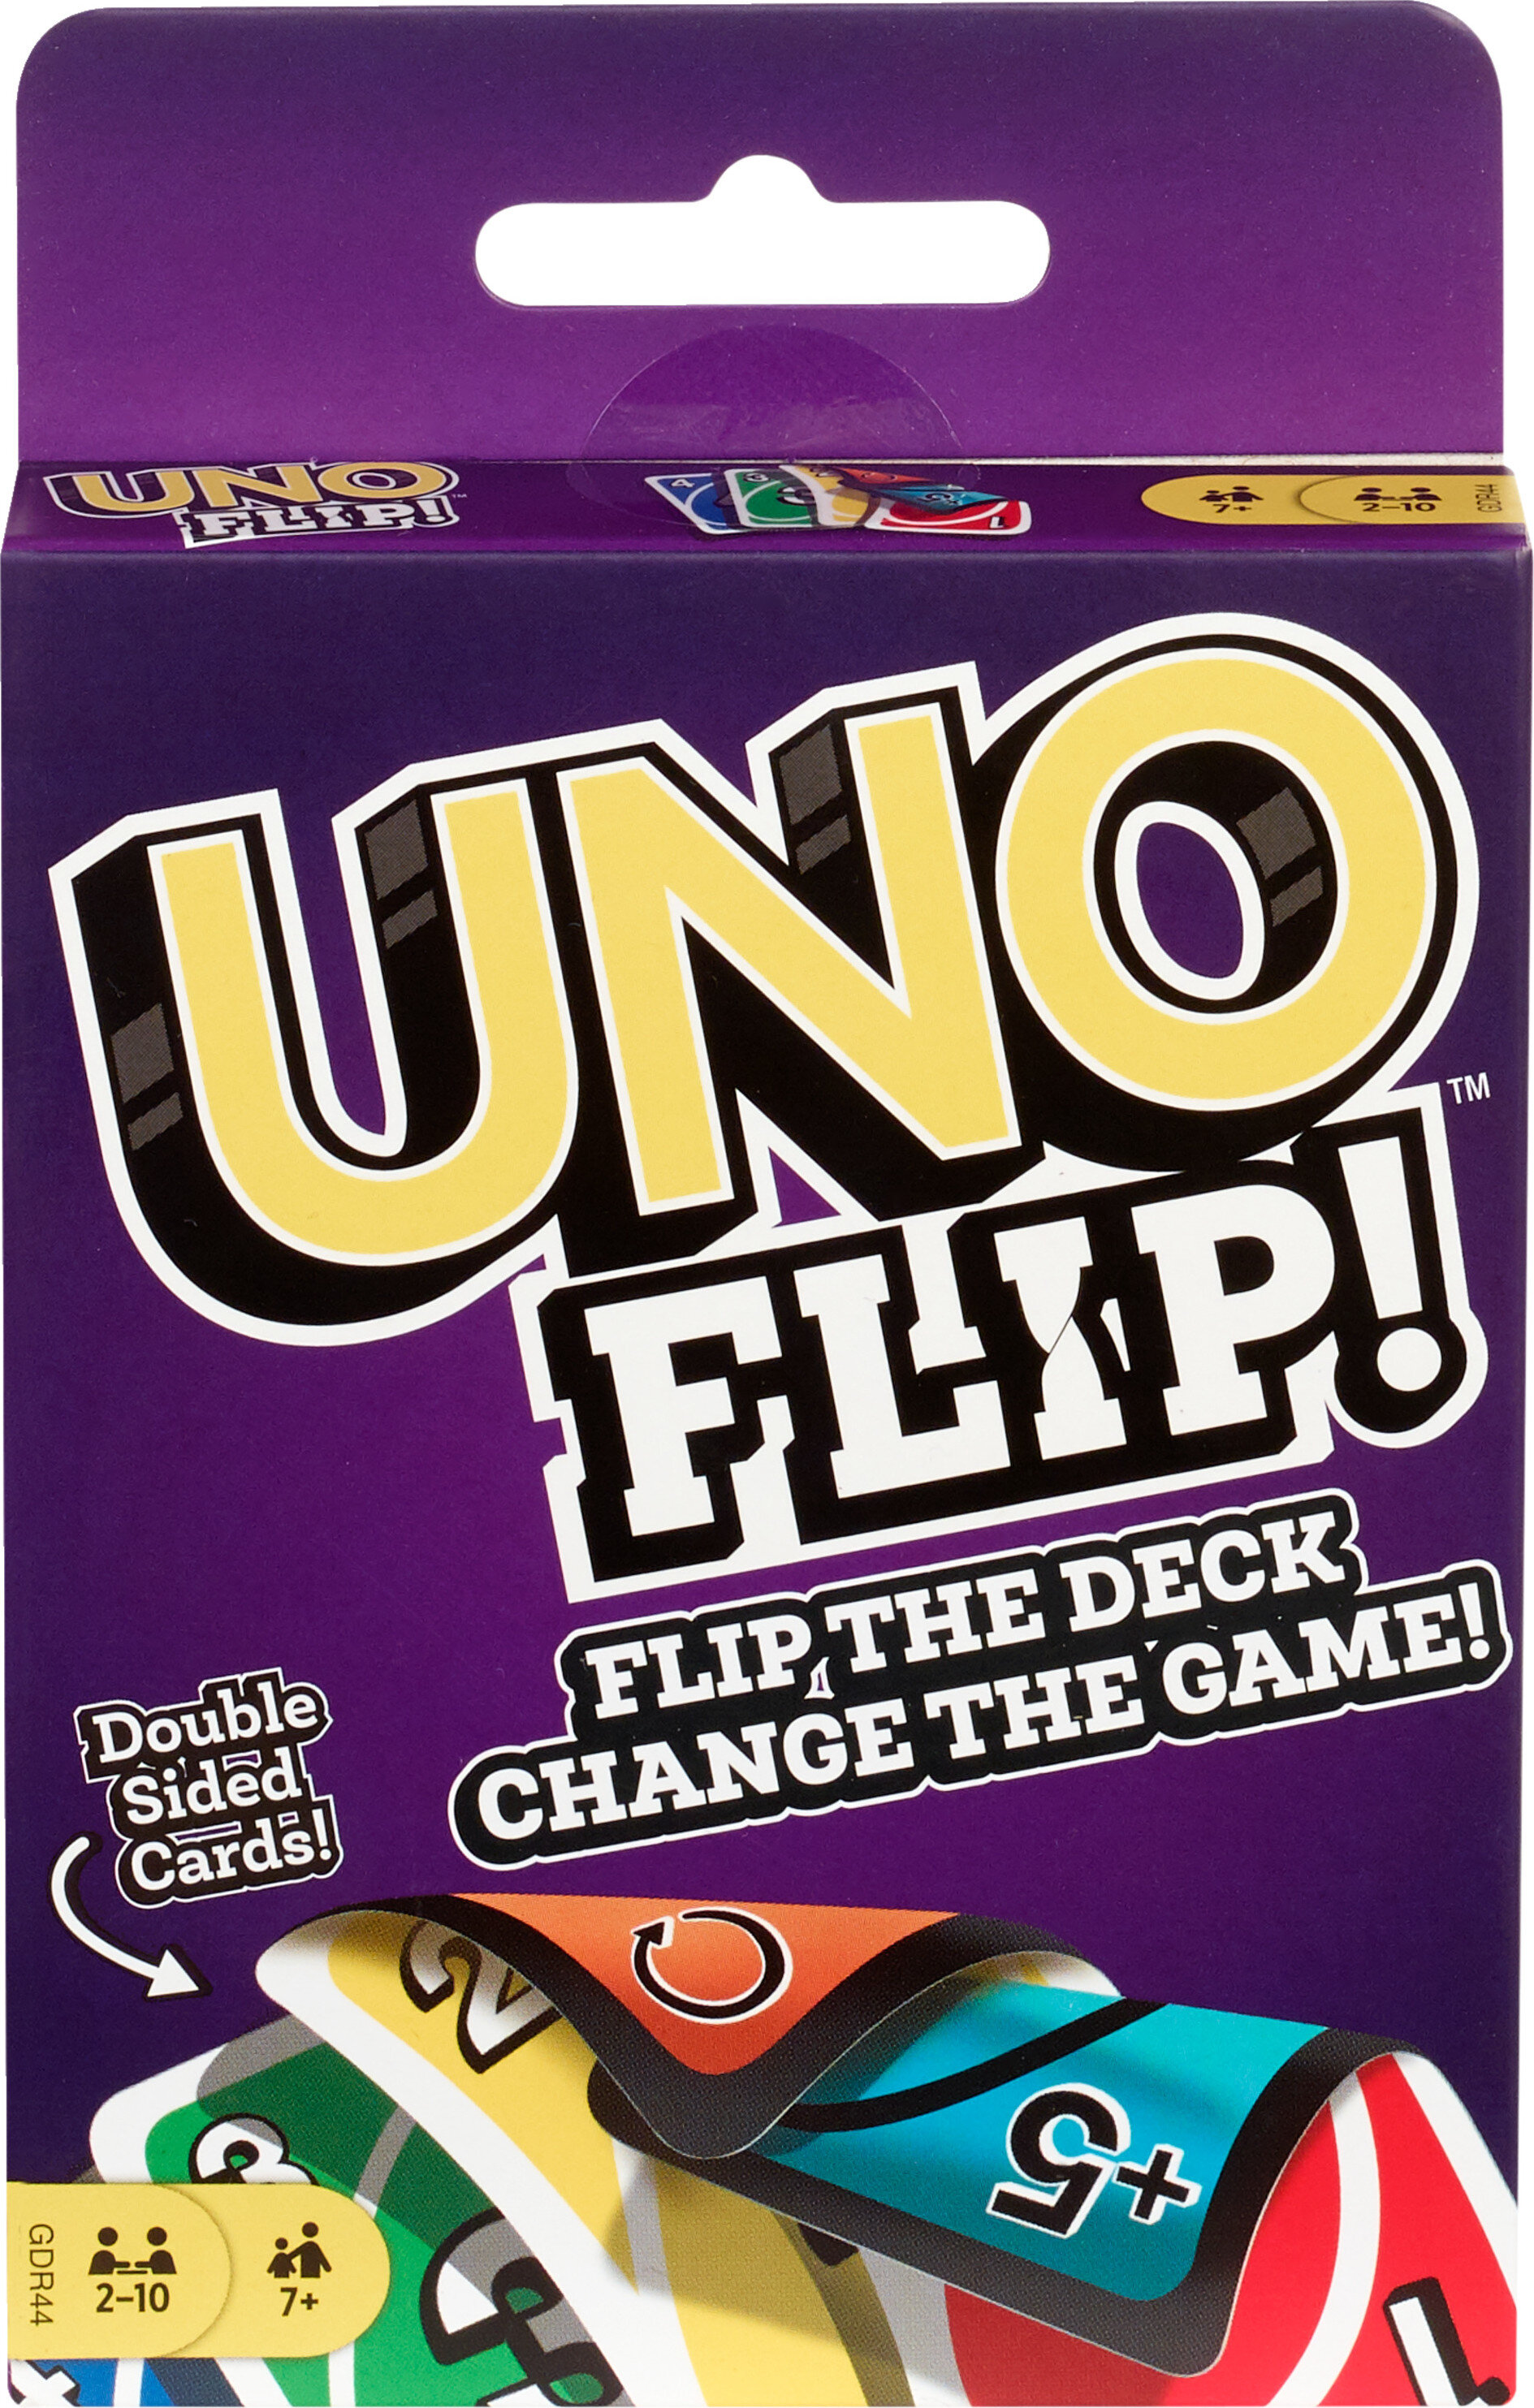 UNO Flip! Card Game for Kids, Adults & Family Night with Double-Sided Cards, Light & Dark - image 1 of 7